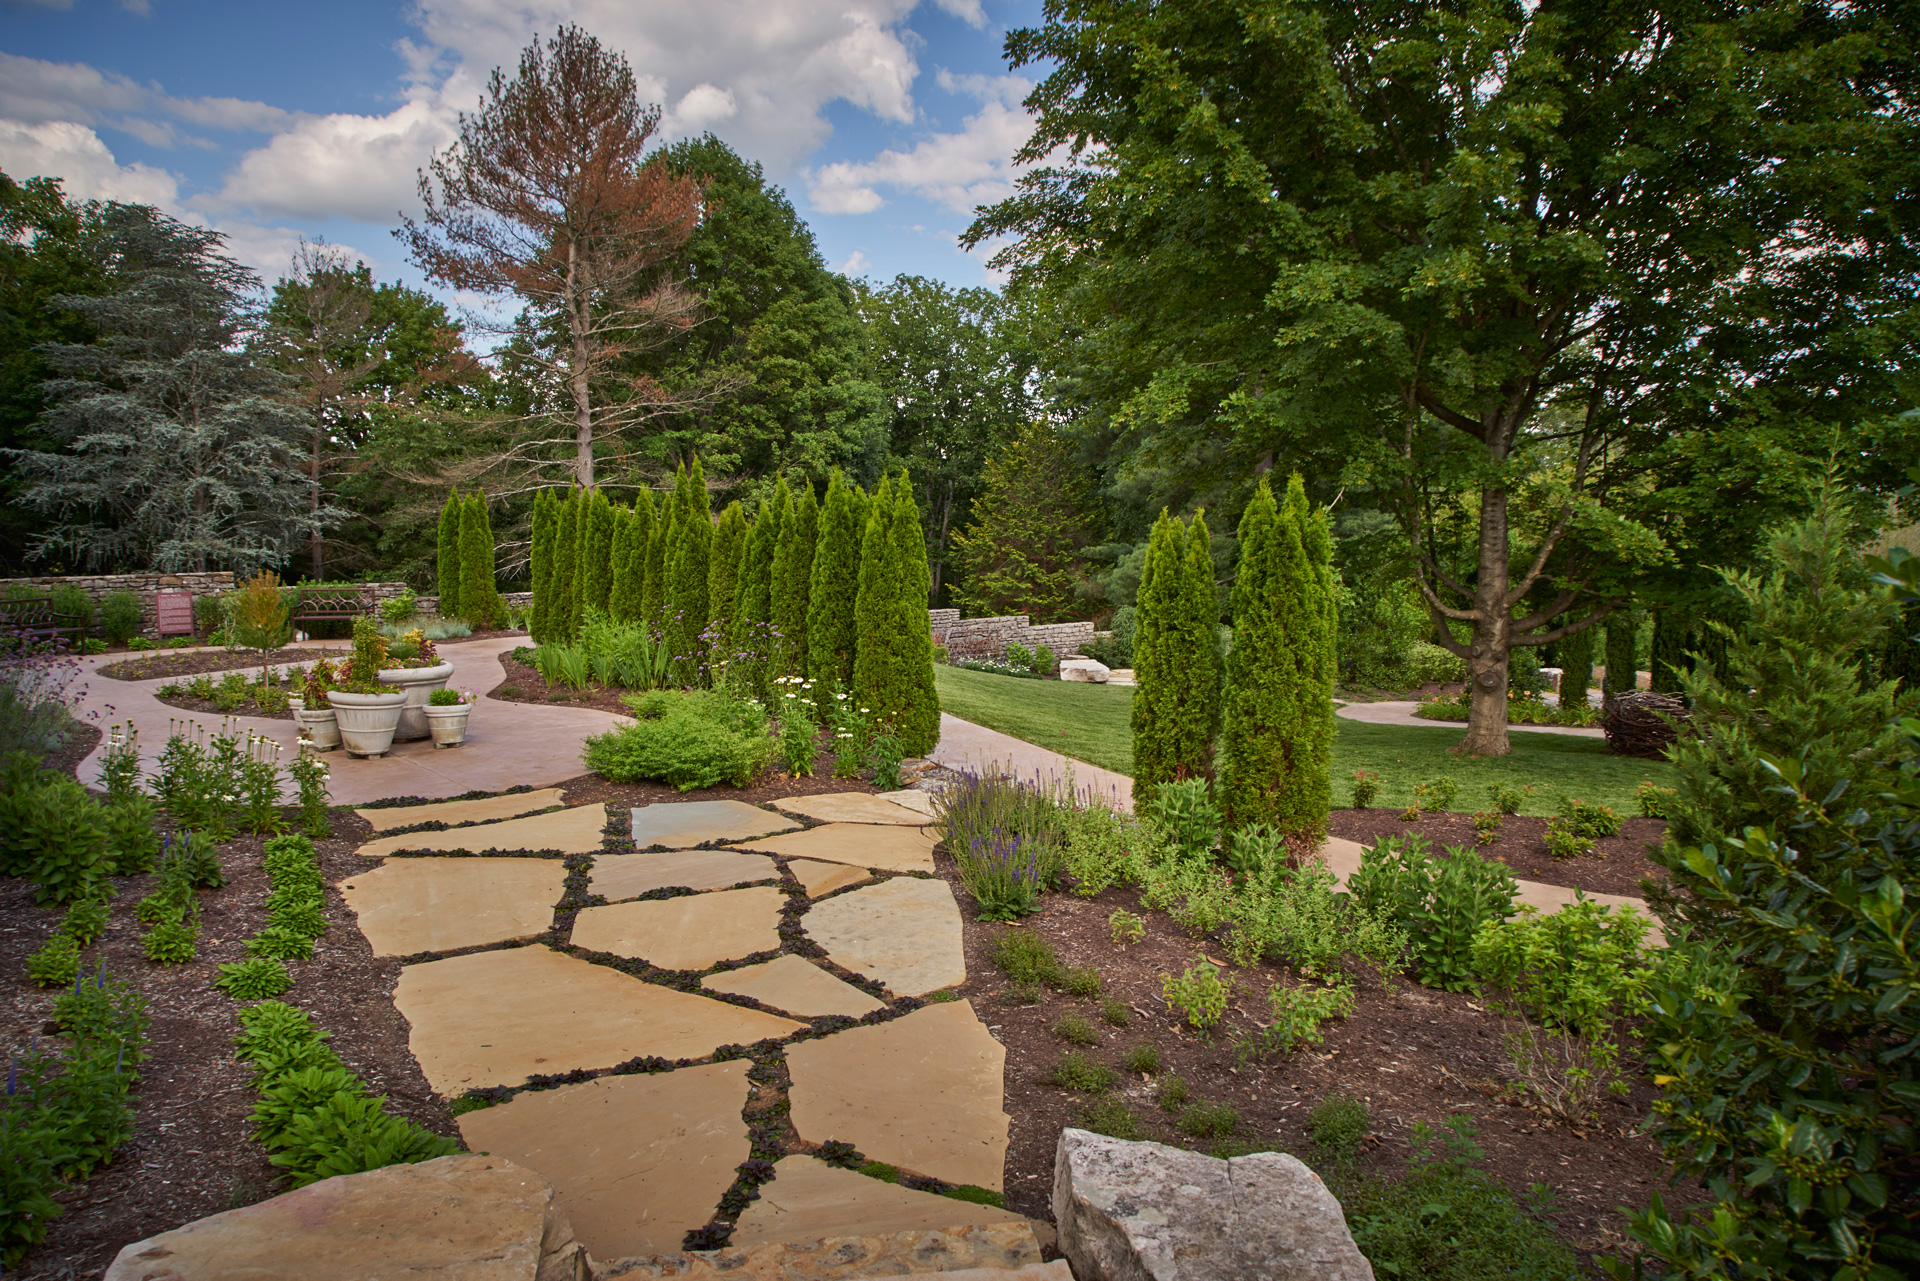 Knoxville Botanical Garden And Arboretum